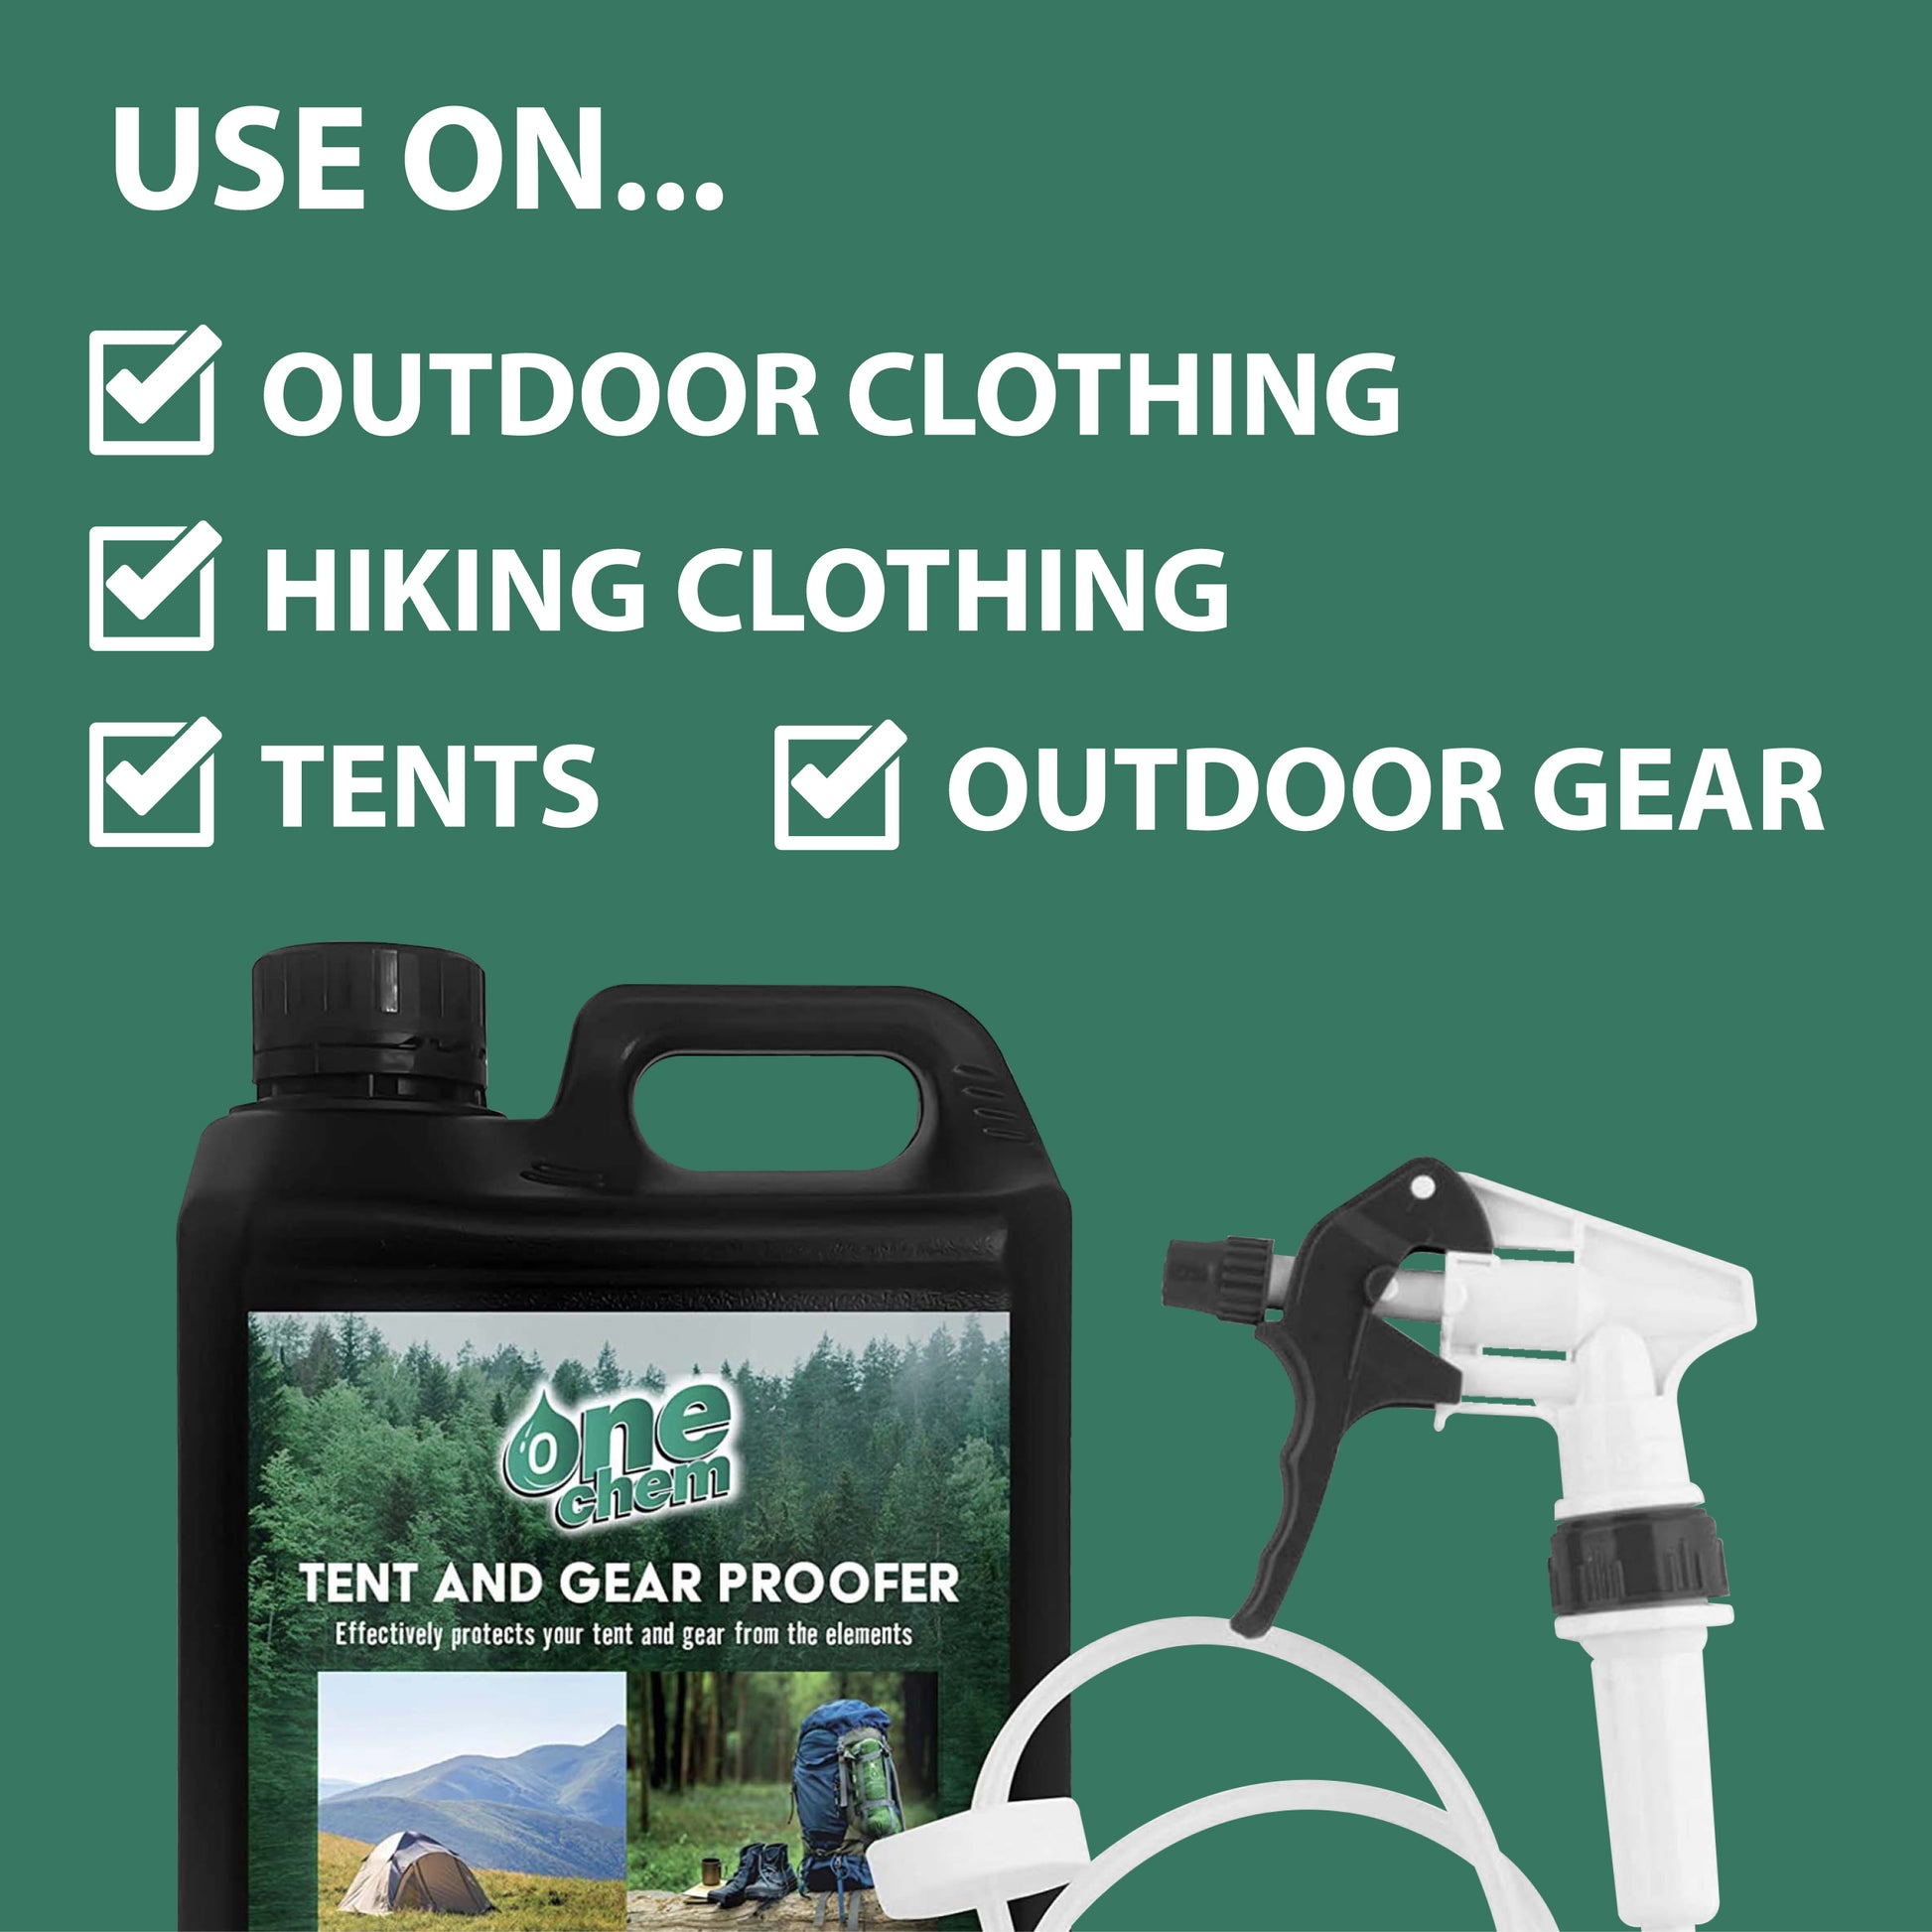 use on outdoor clothing, hiking clothing, tents, outdoor gear